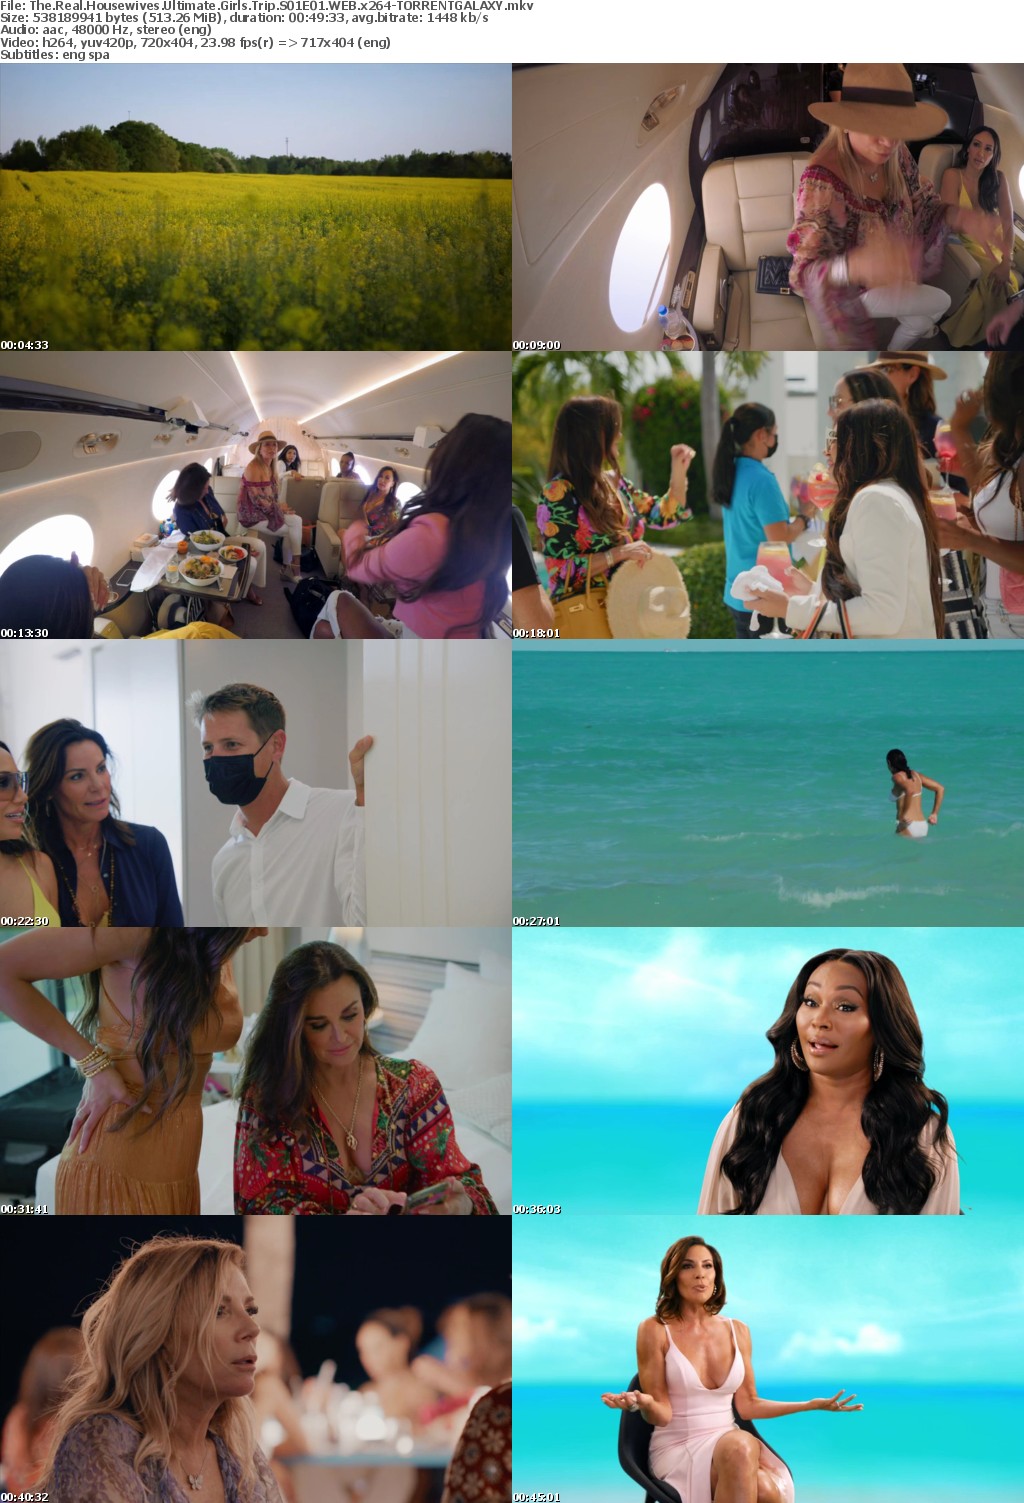 The Real Housewives Ultimate Girls Trip S01E01 WEB x264-GALAXY